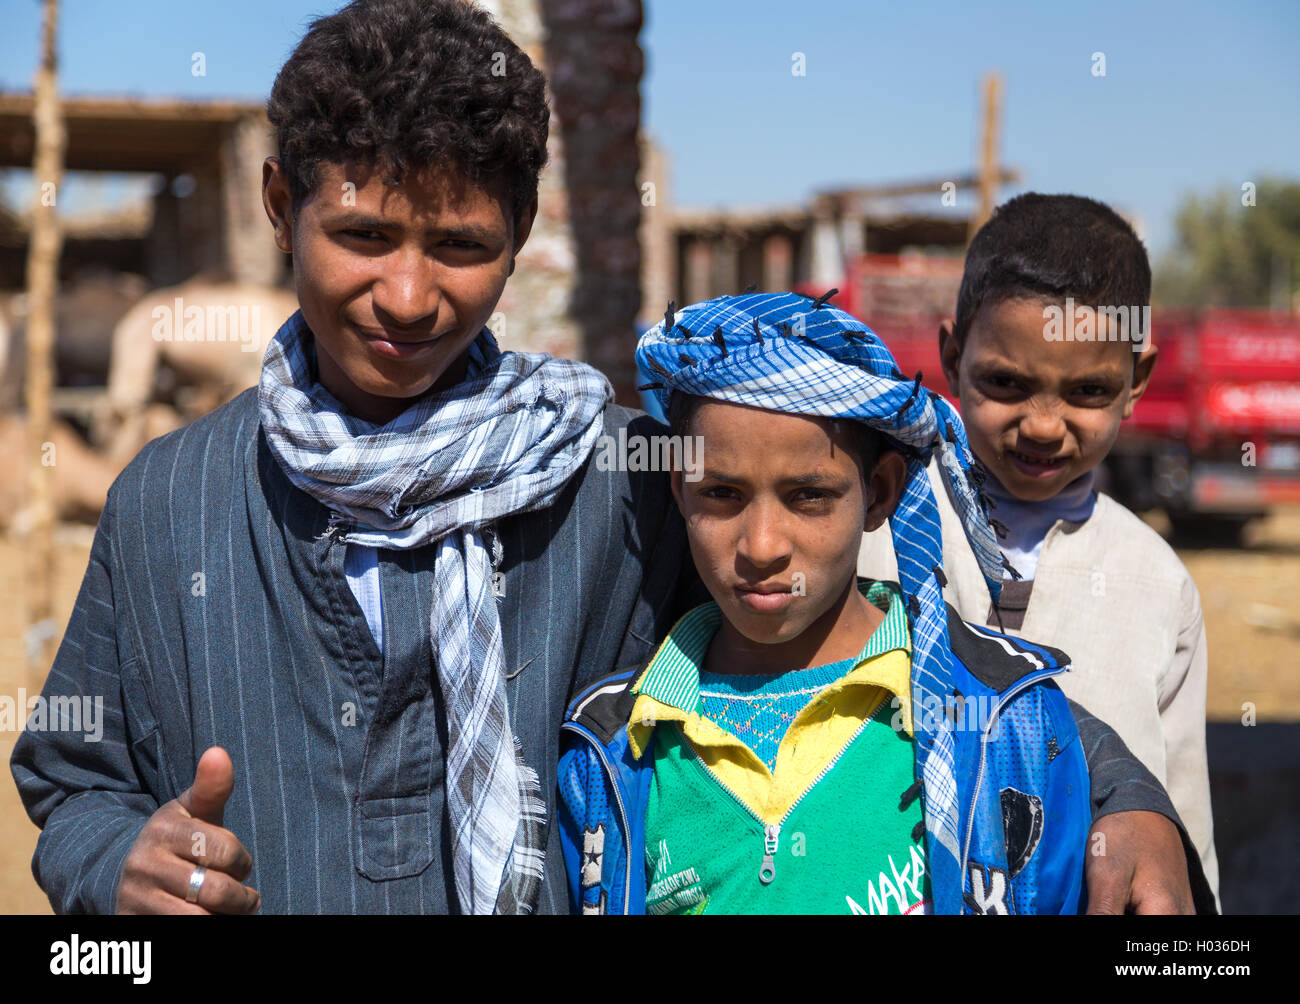 DARAW, EGYPT - FEBRUARY 6, 2016: Portrait of group of local boys at Camel market. Stock Photo